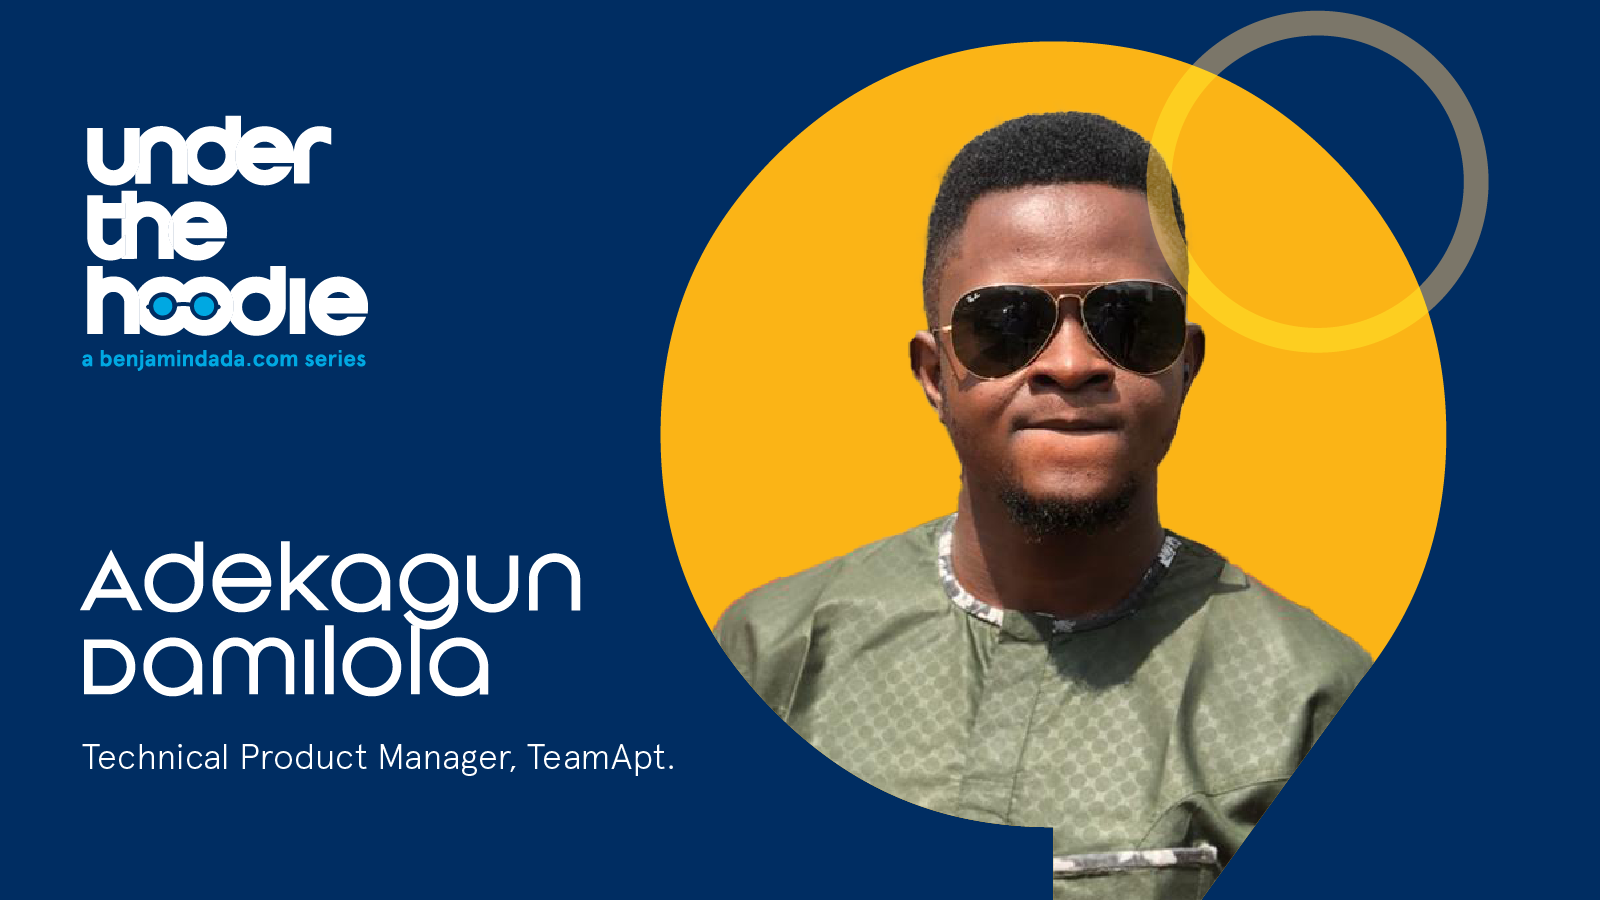 Under The Hoodie —Adekagun Damilola, Technical Product Manager at TeamApt